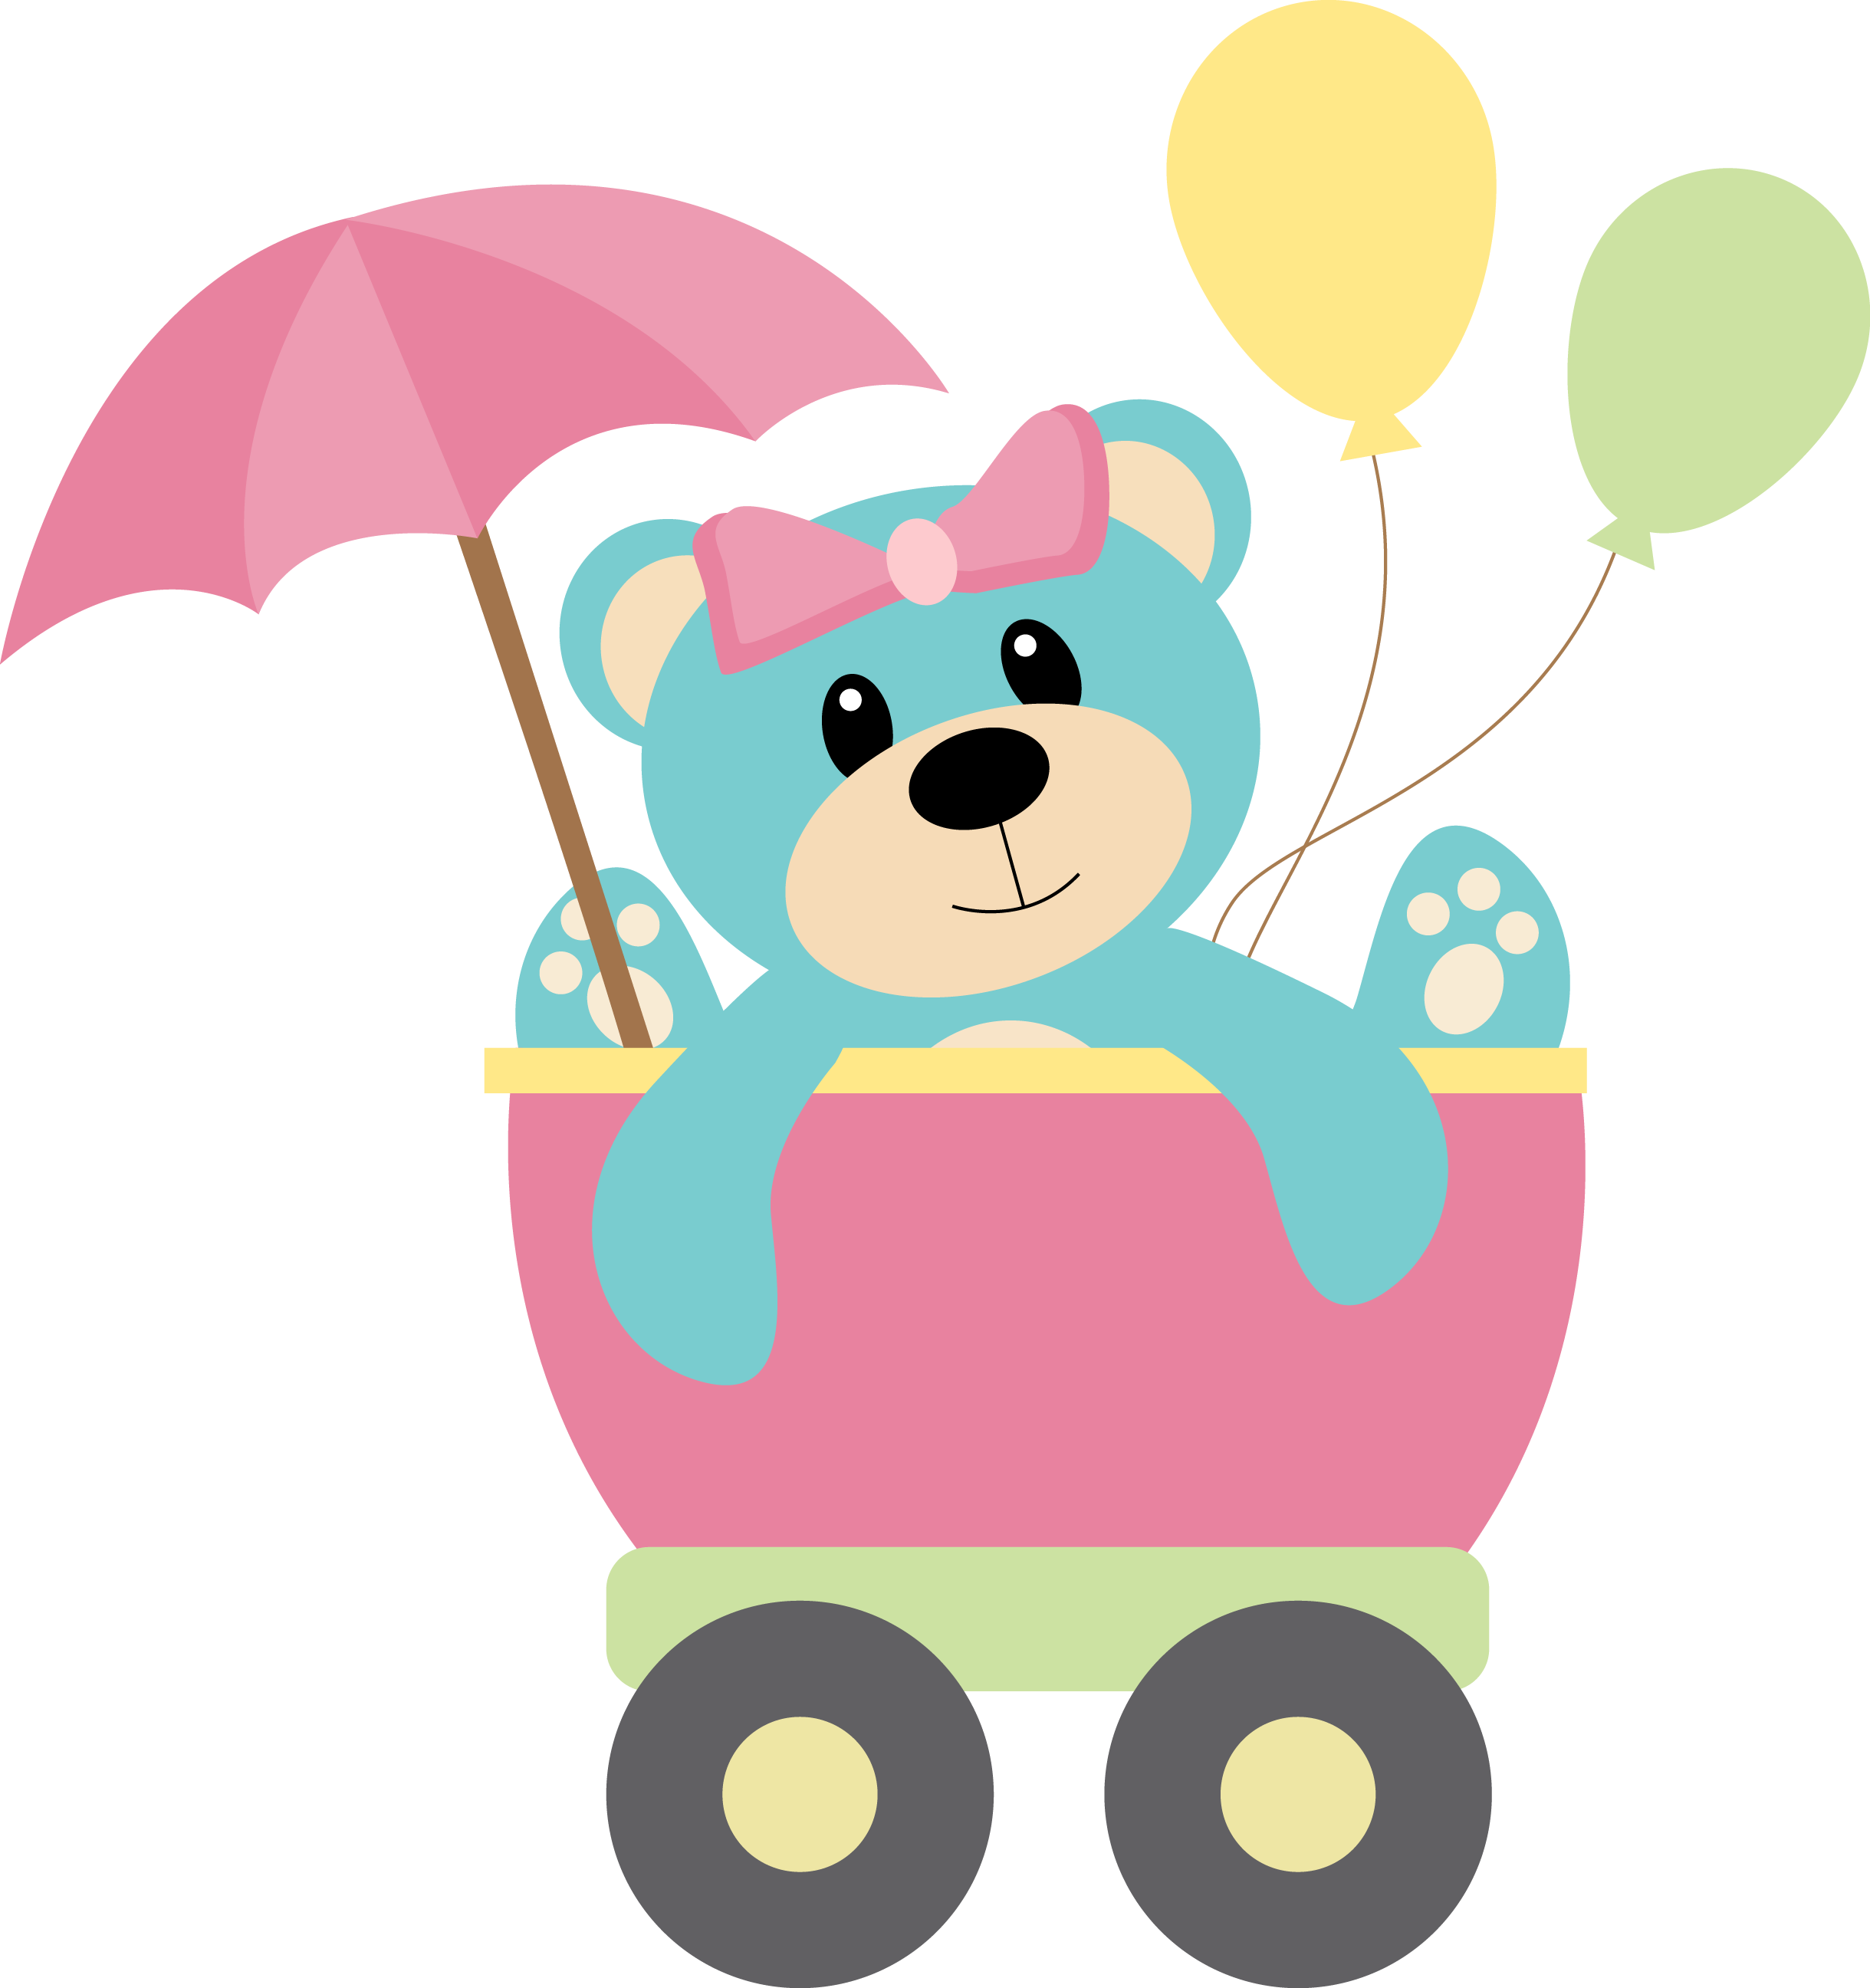 Applique Ideas, Teddy Bear, Paper Cards, Baby Crafts, - Infant (2439x2593)